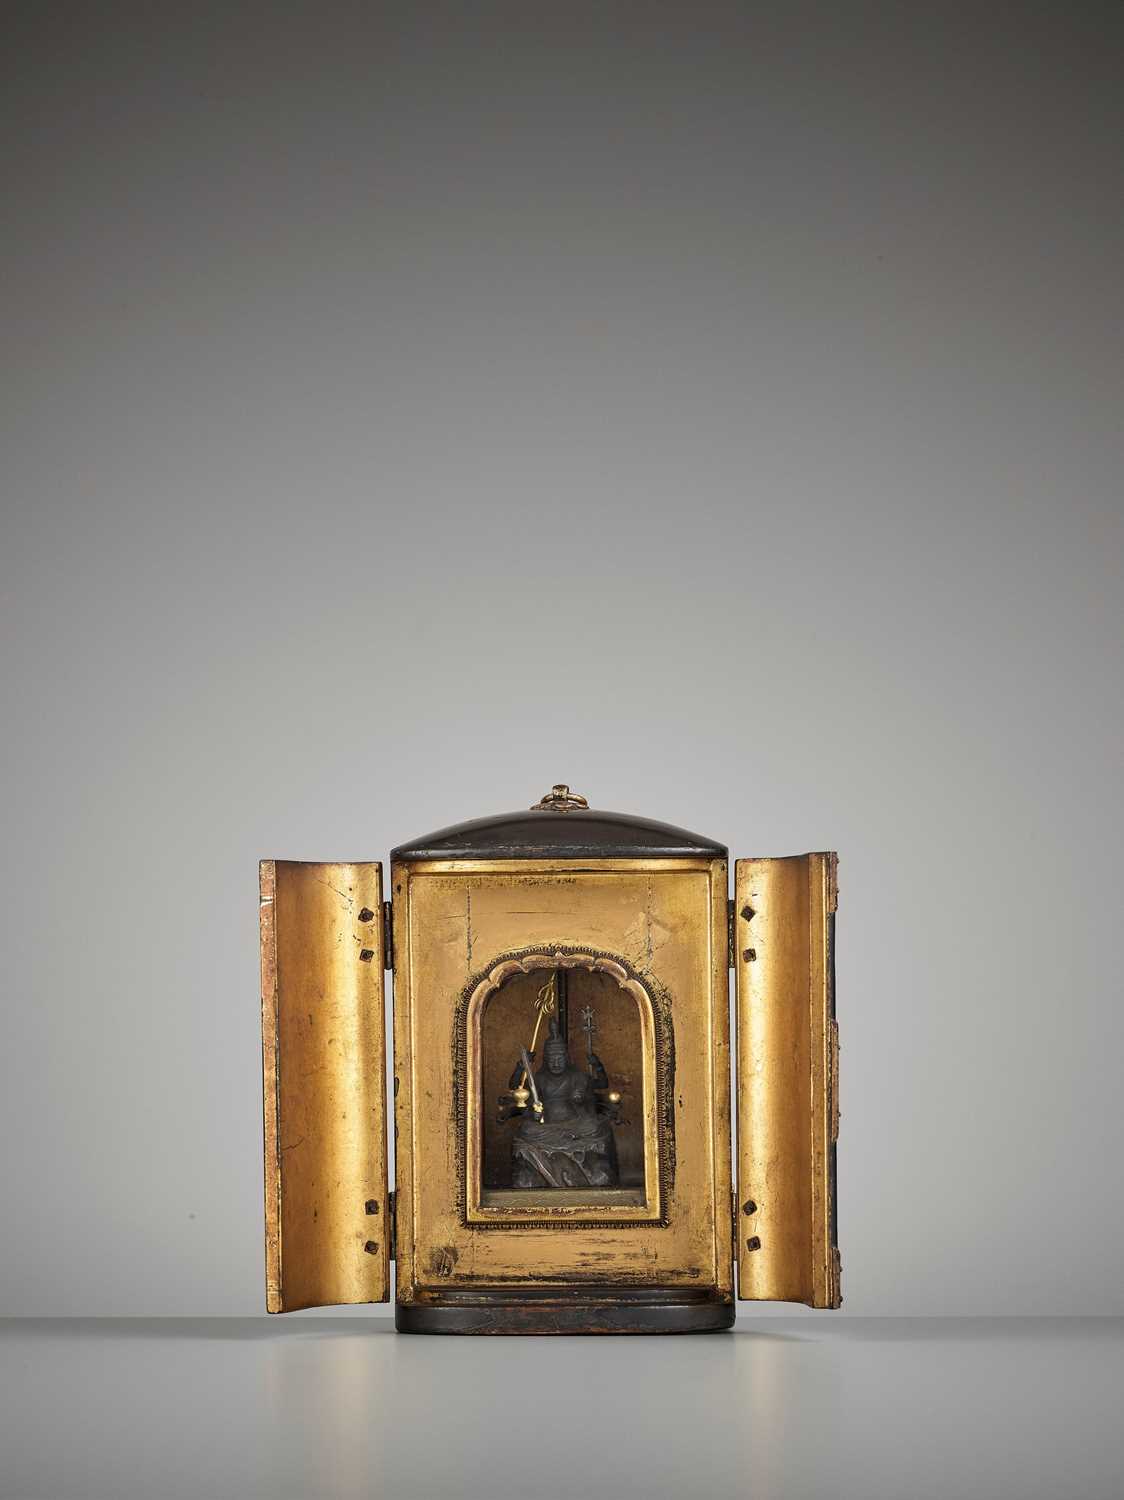 Lot 159 - A LACQUERED WOOD DOUBLE-SIDED TRAVELING SHRINE, ZUSHI, WITH A FIGURE OF MARISHITEN